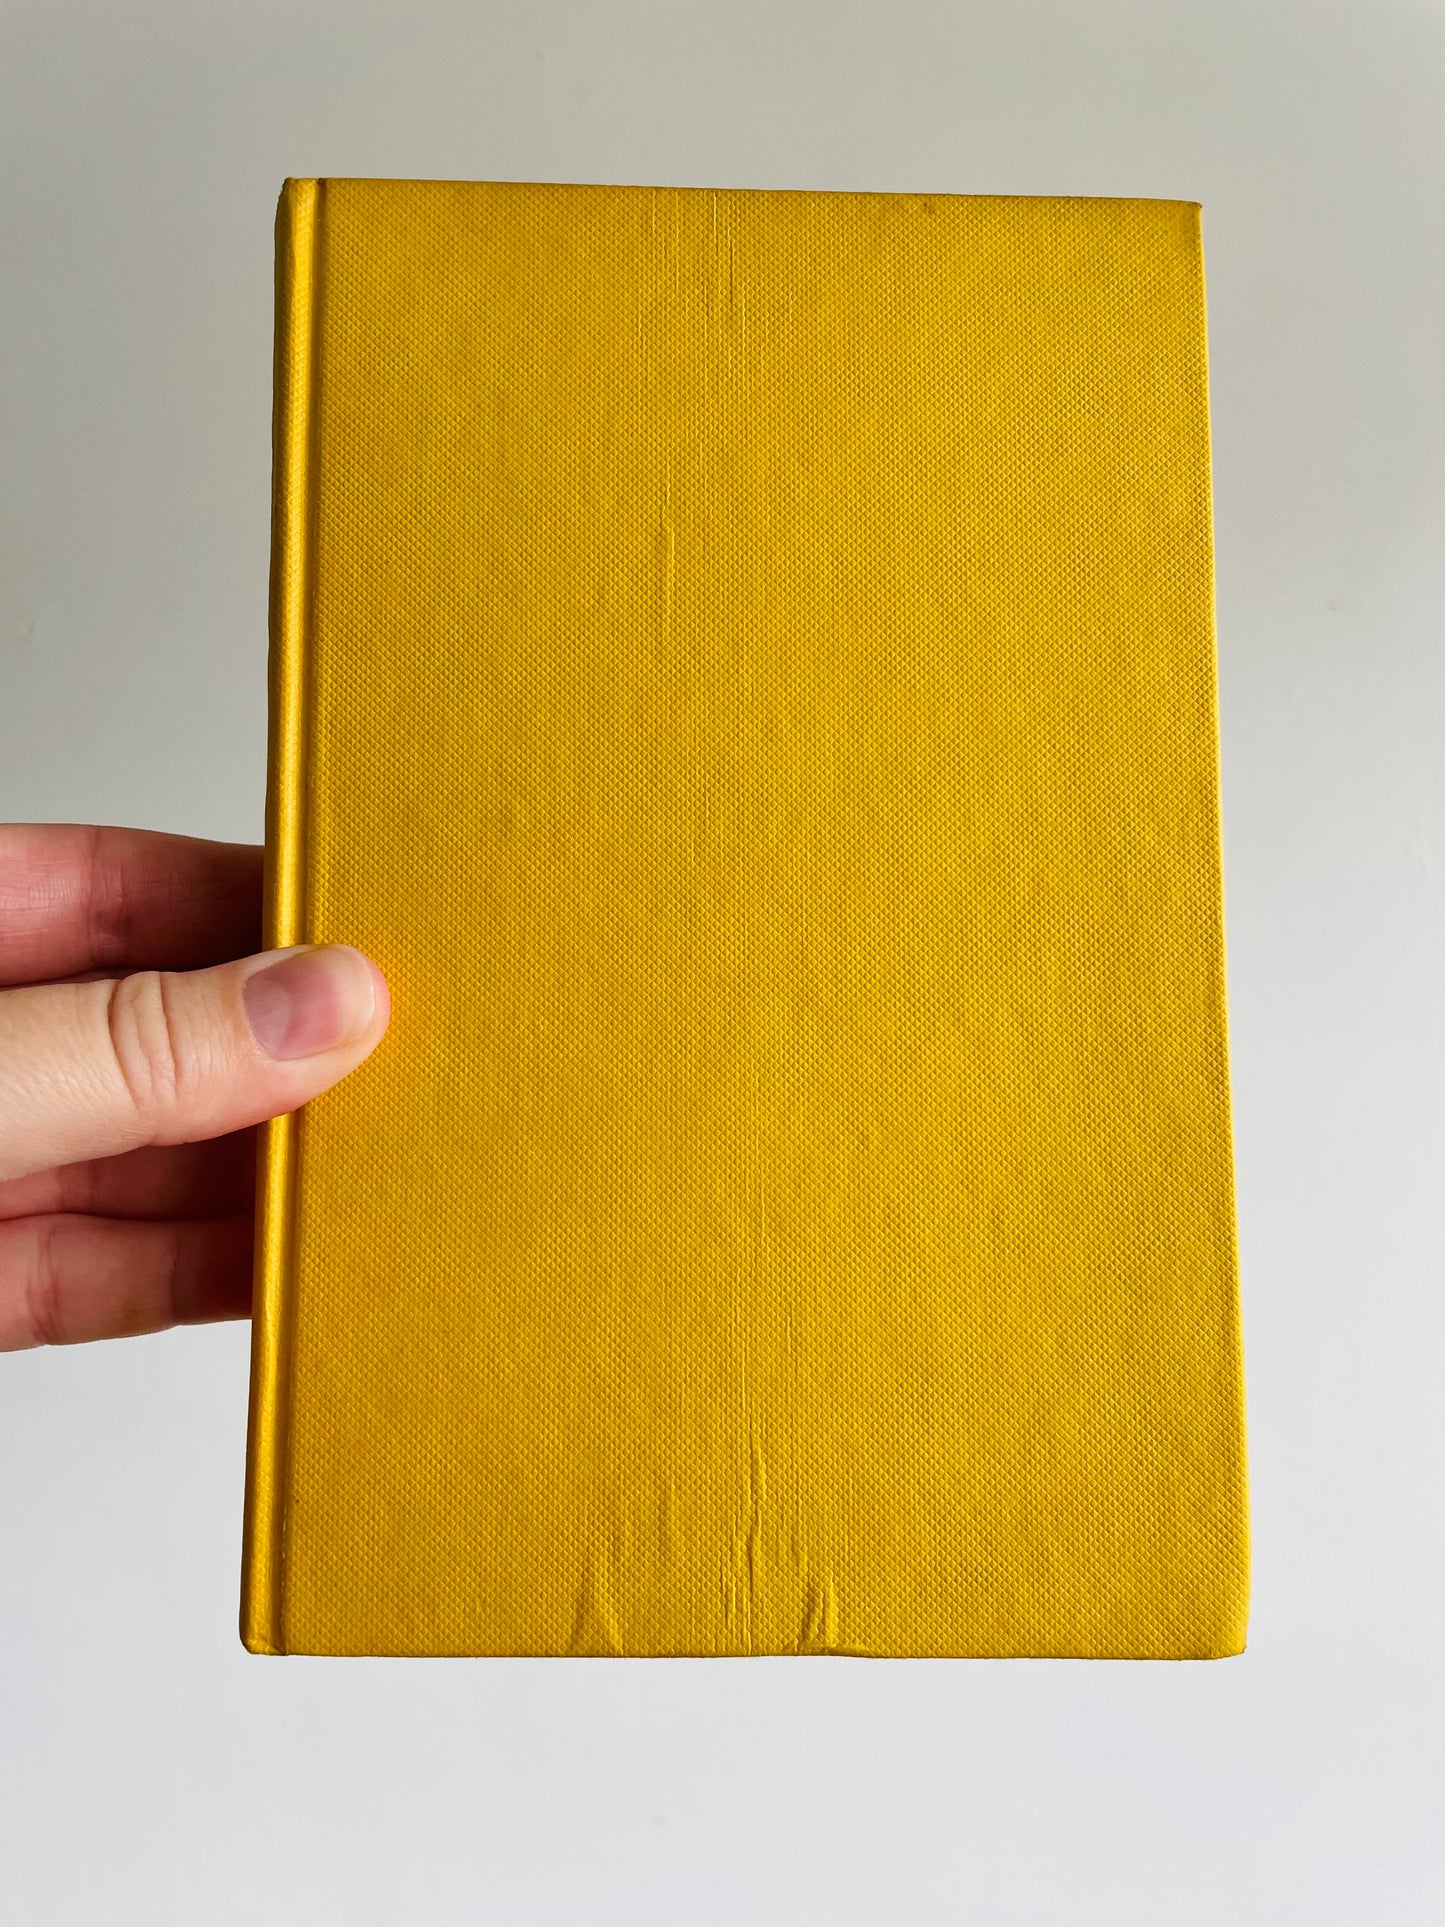 North From Rome by Helen MacInnes - Yellow Clothbound Hardcover Book (1958) - Secret Agent Cold War Thriller